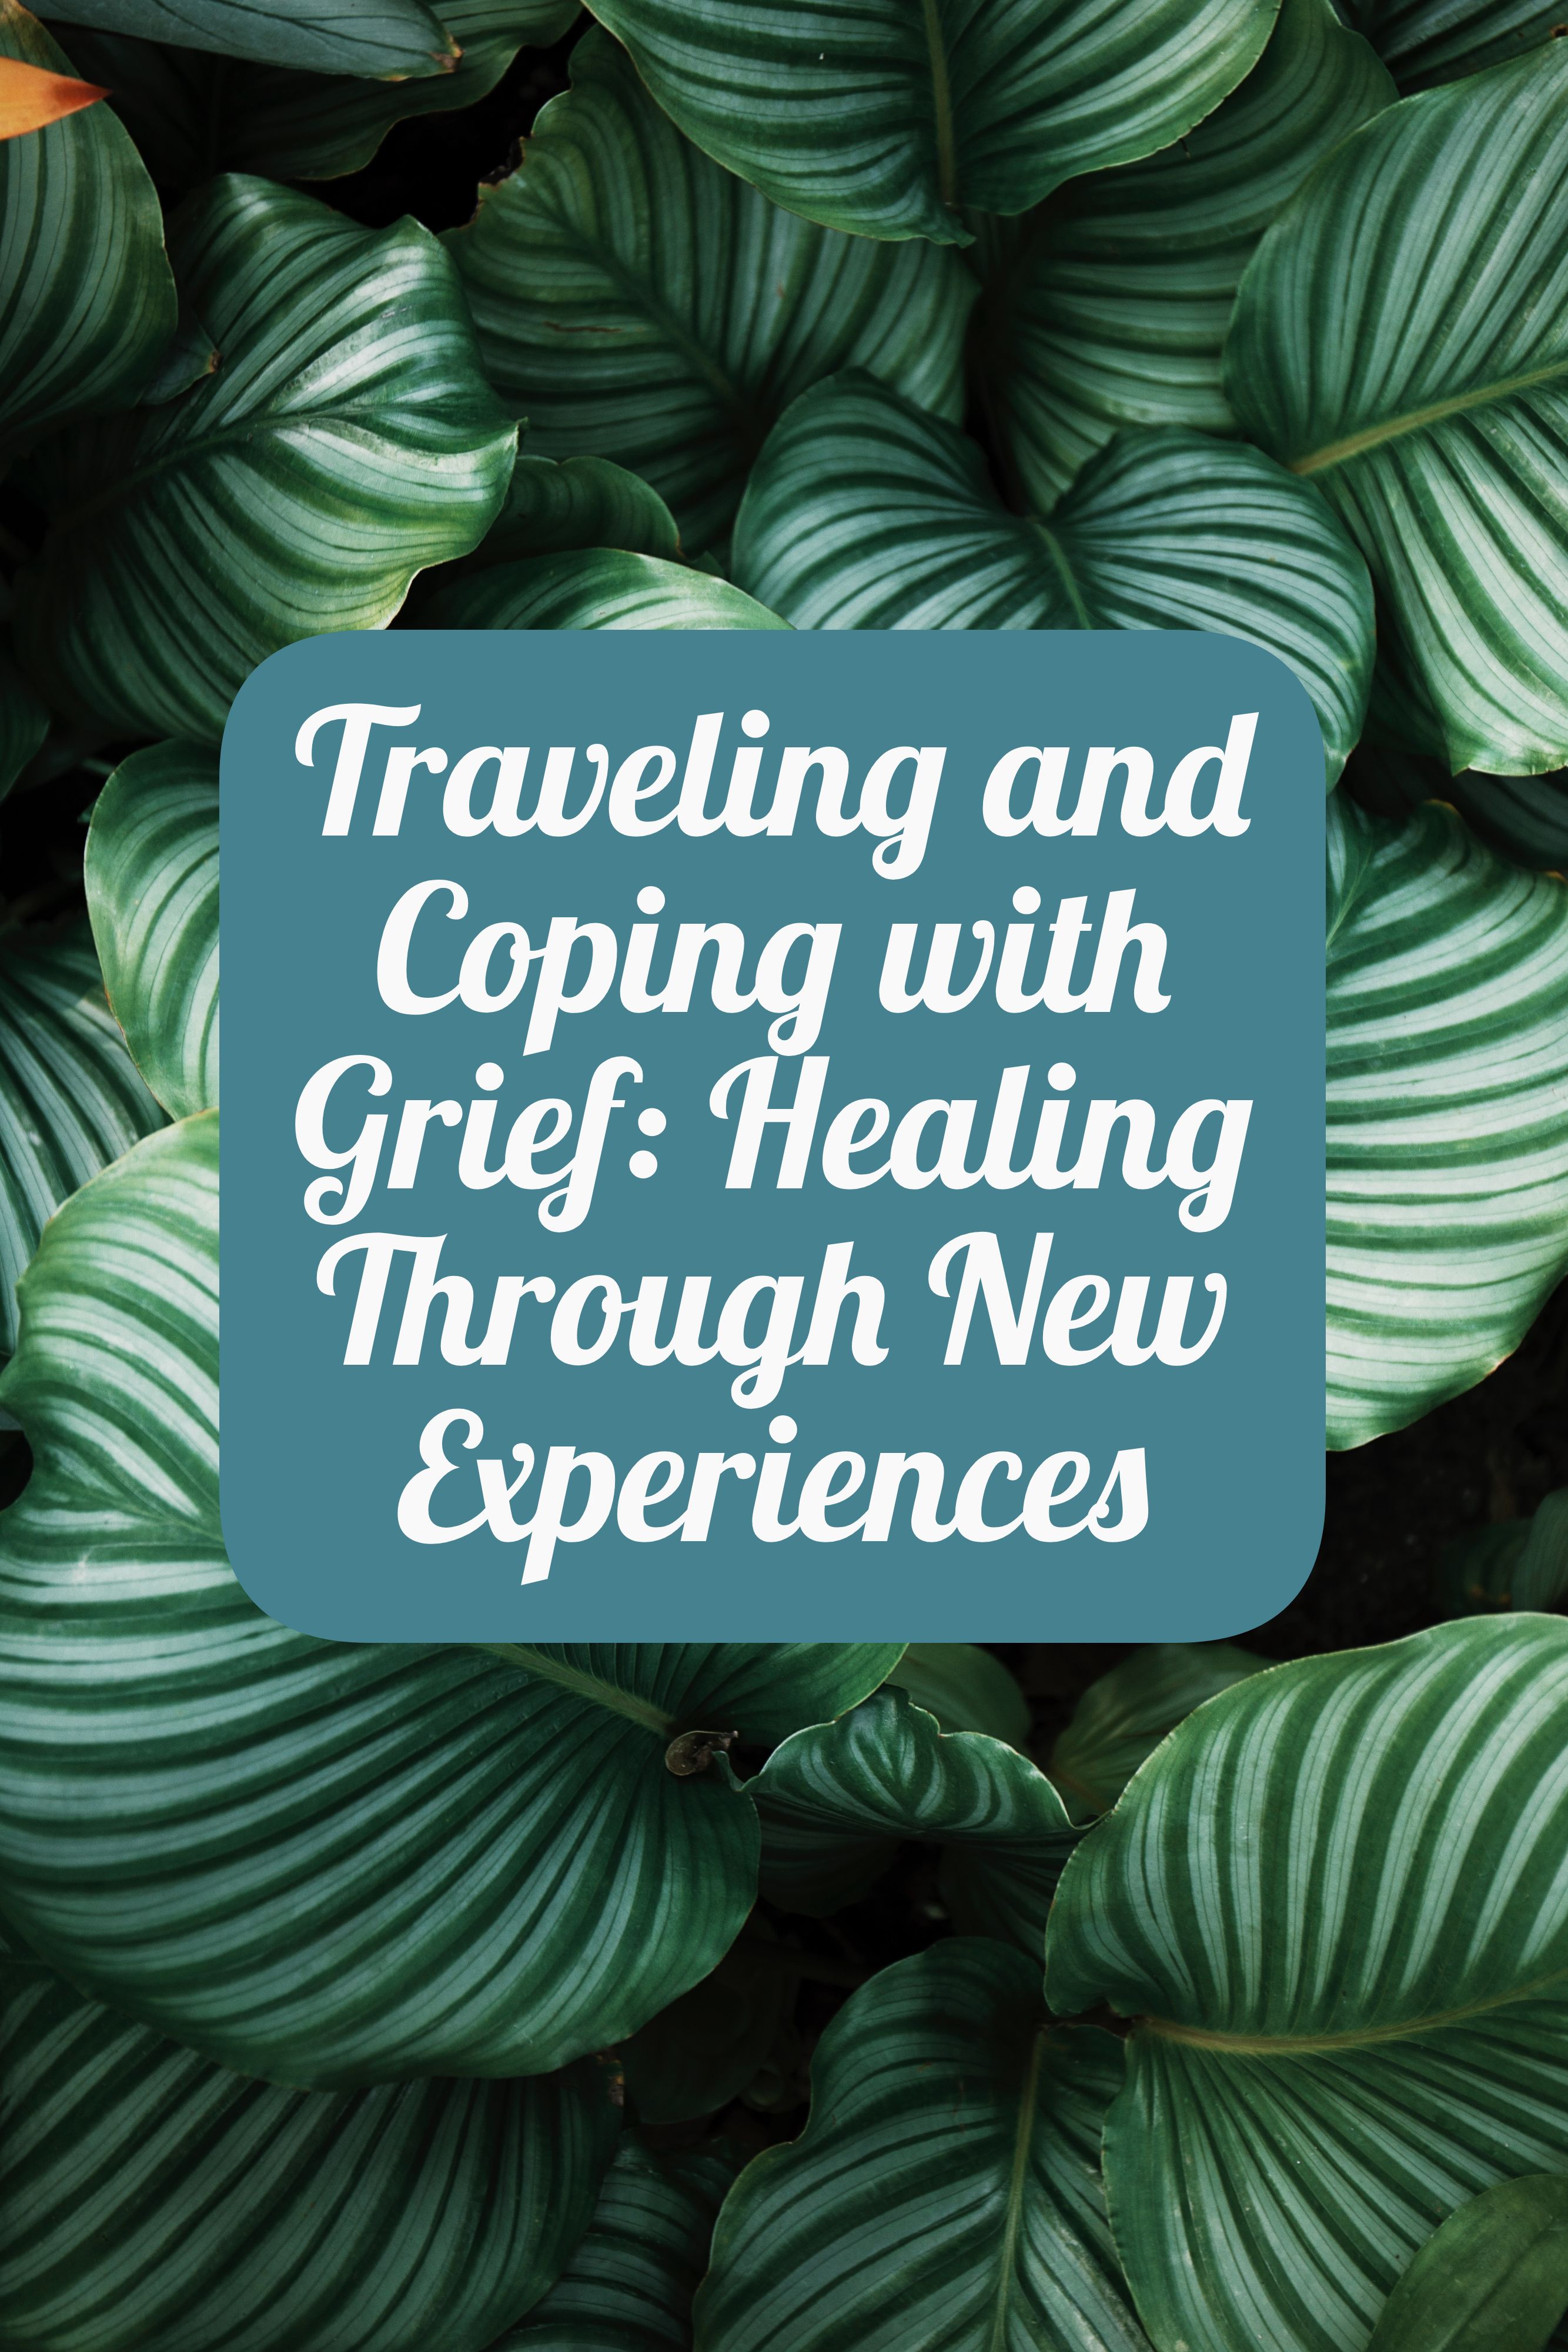 Traveling and Coping with Grief: Healing Through New Experiences